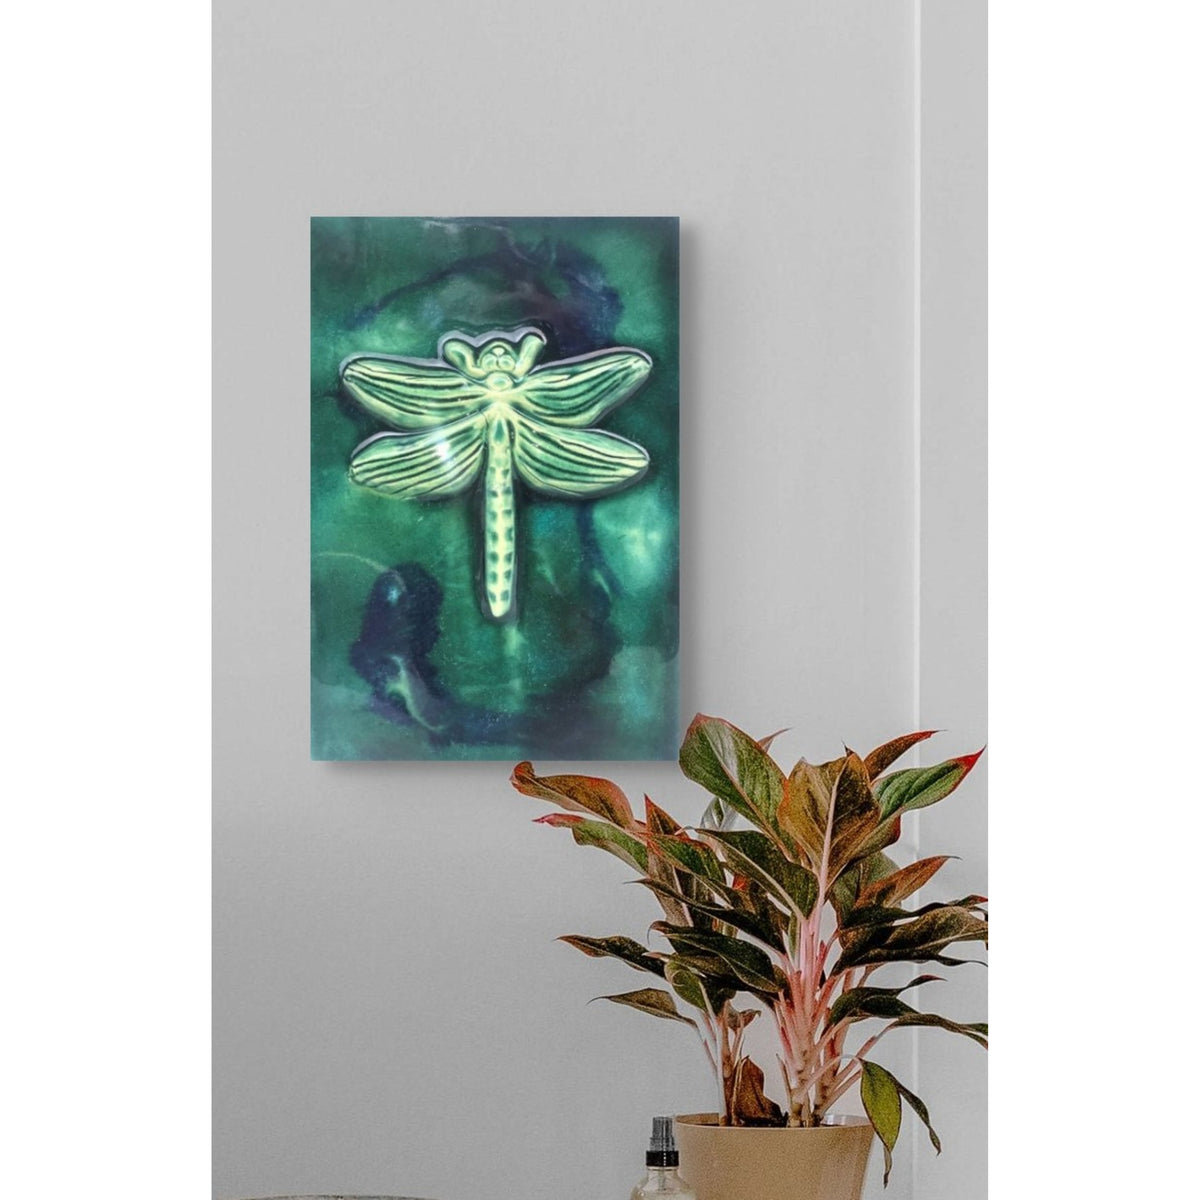 Ceramic Dragonfly Tiles, decorative dragonfly artwork, dragonfly bathroom shower tiles, dragonfly kitchen wall tiles